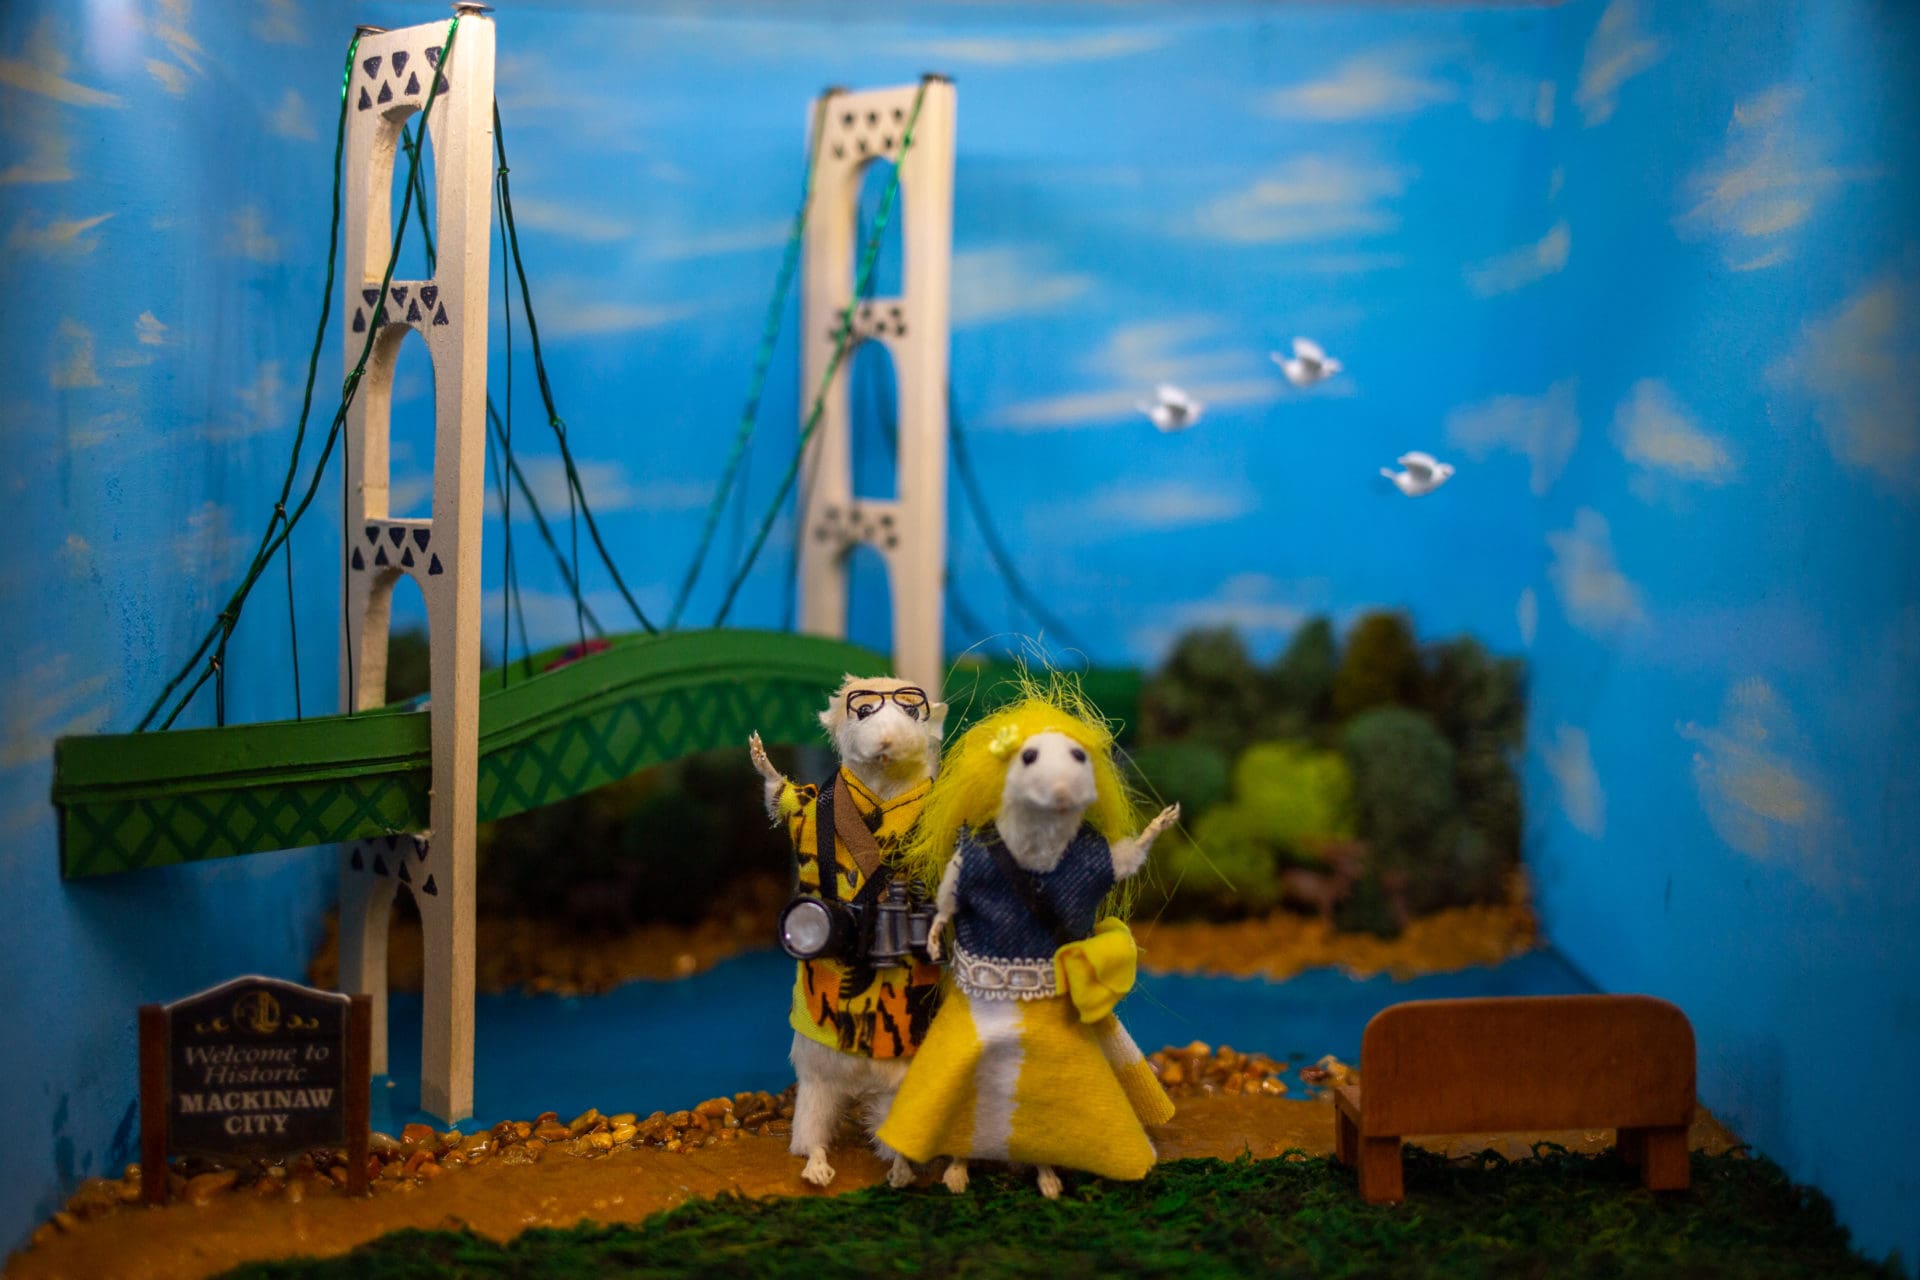 Two taxidermy mice posed and dressed as tourists in front of a miniature Mackinac Bridge